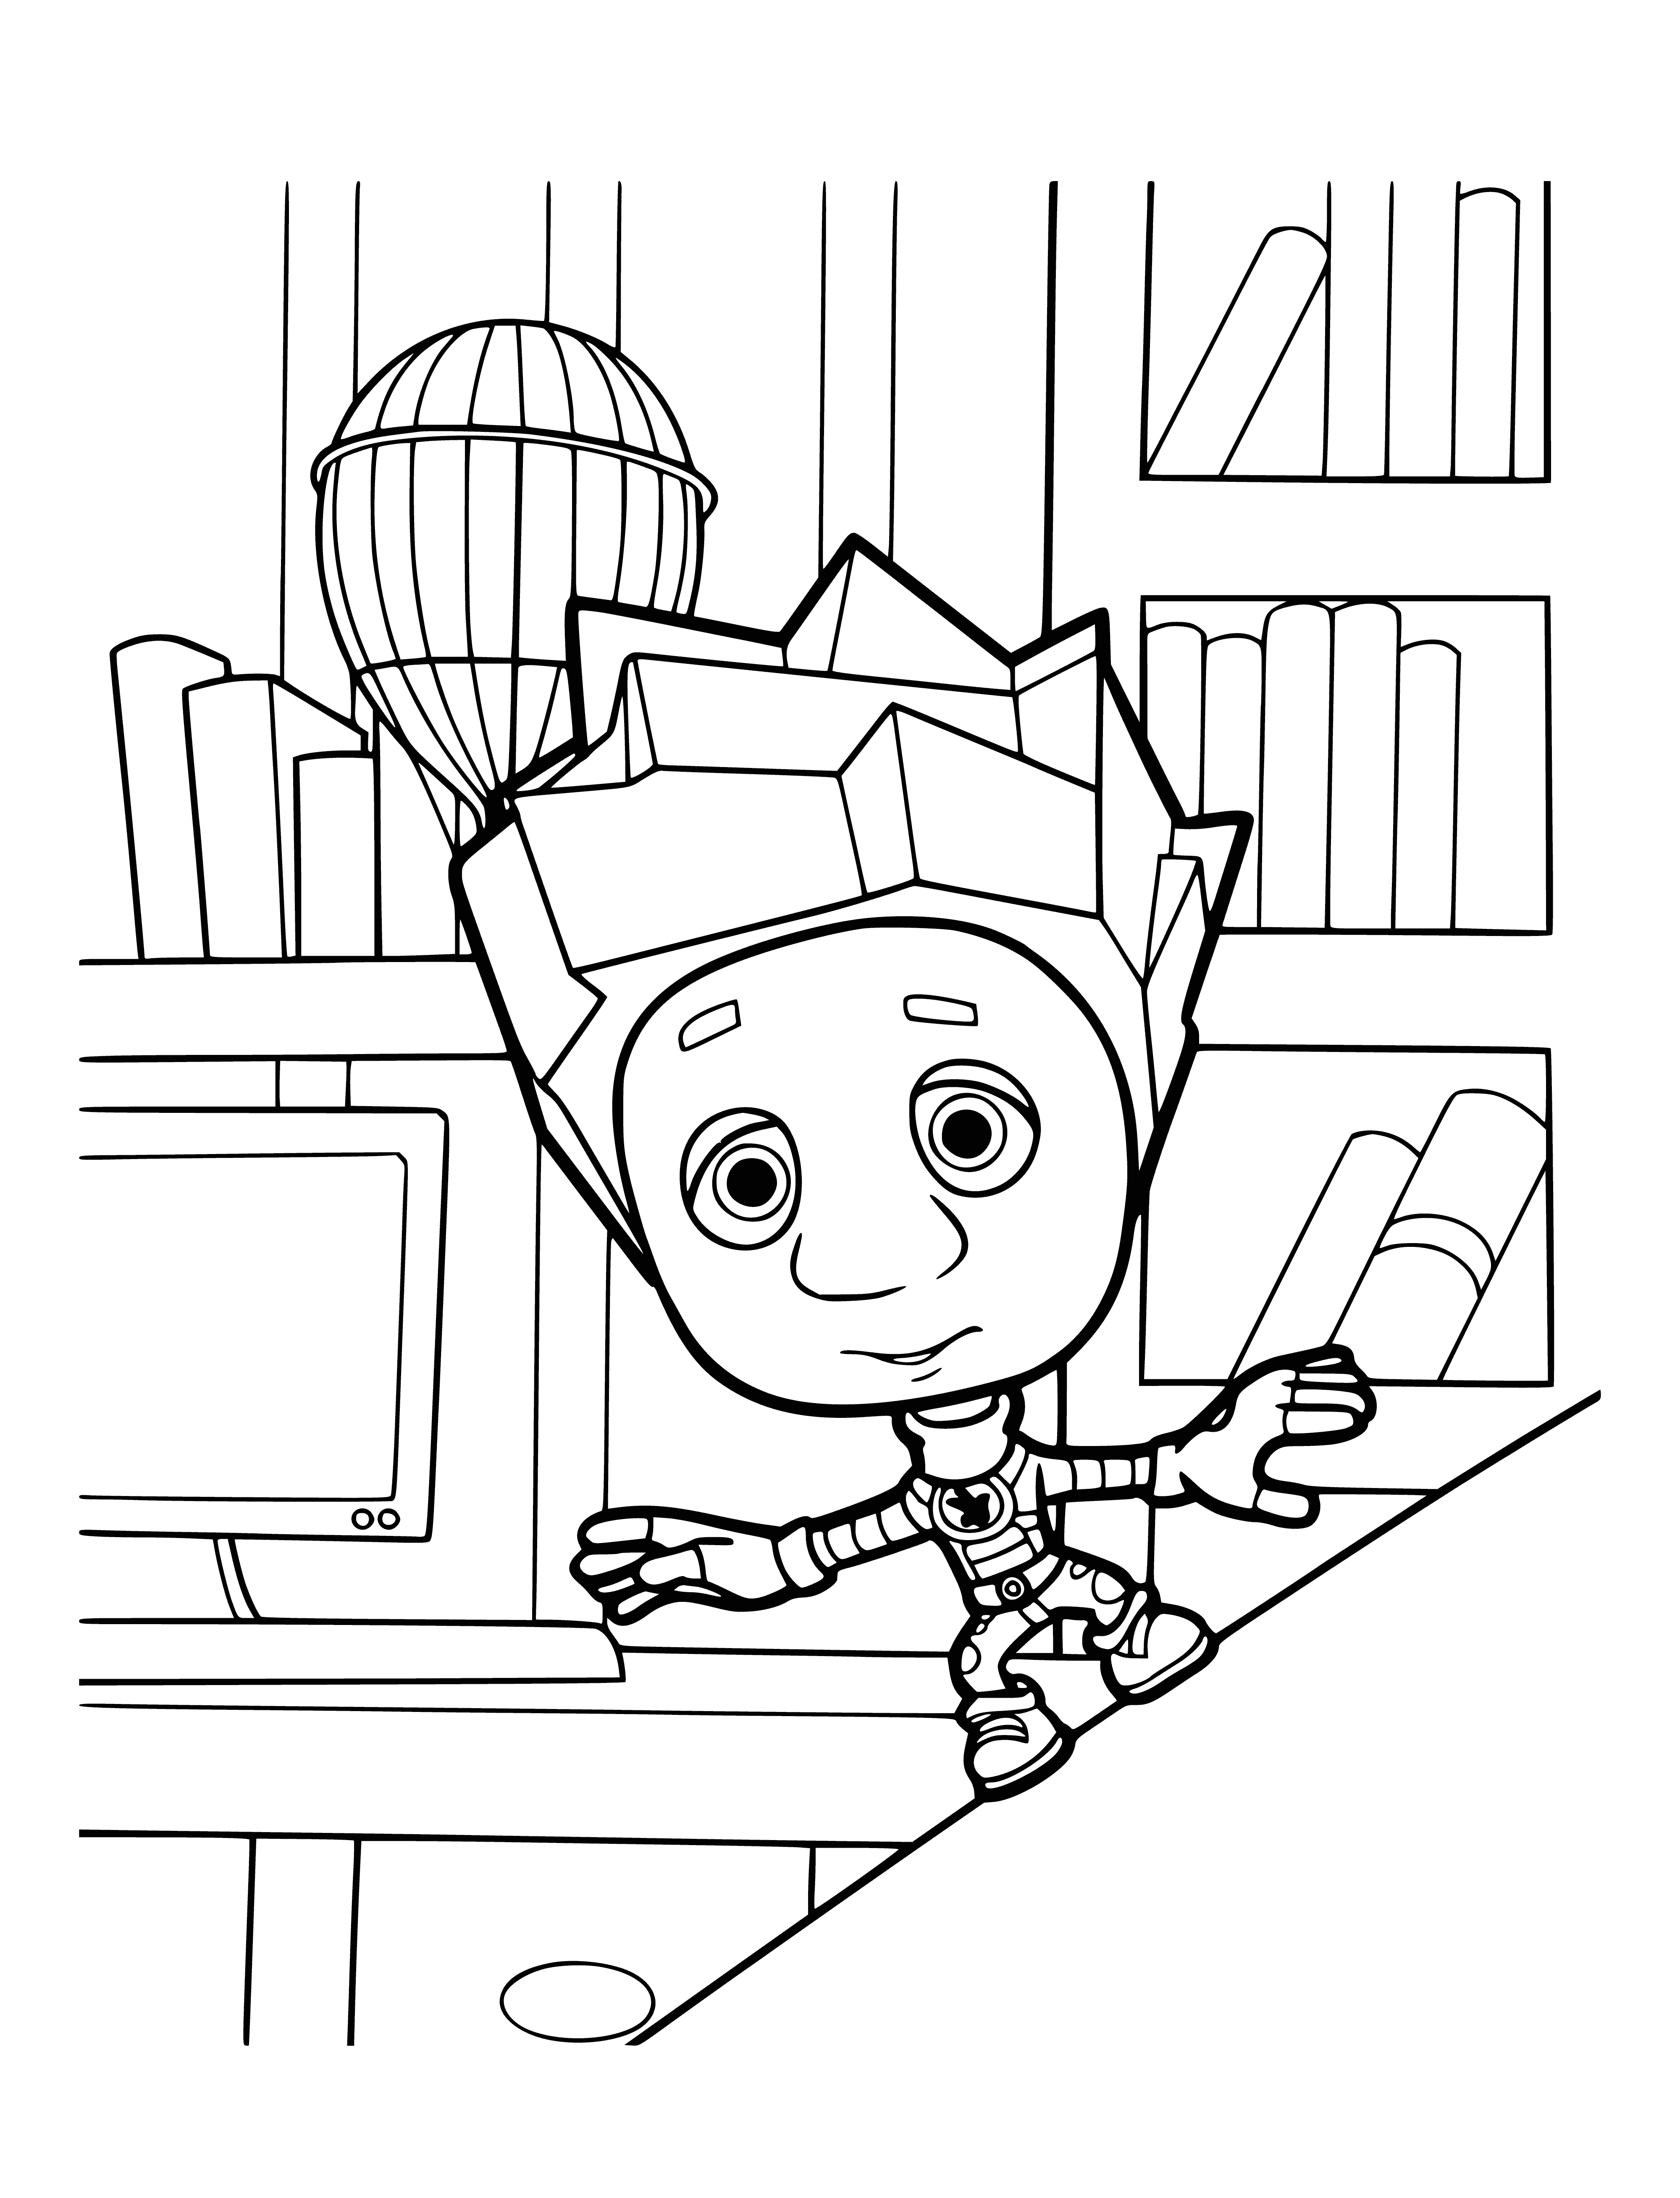 coloring page: Robot holds flower, has red heart & yellow pencil on checkerboard, perfect for a coloring page.